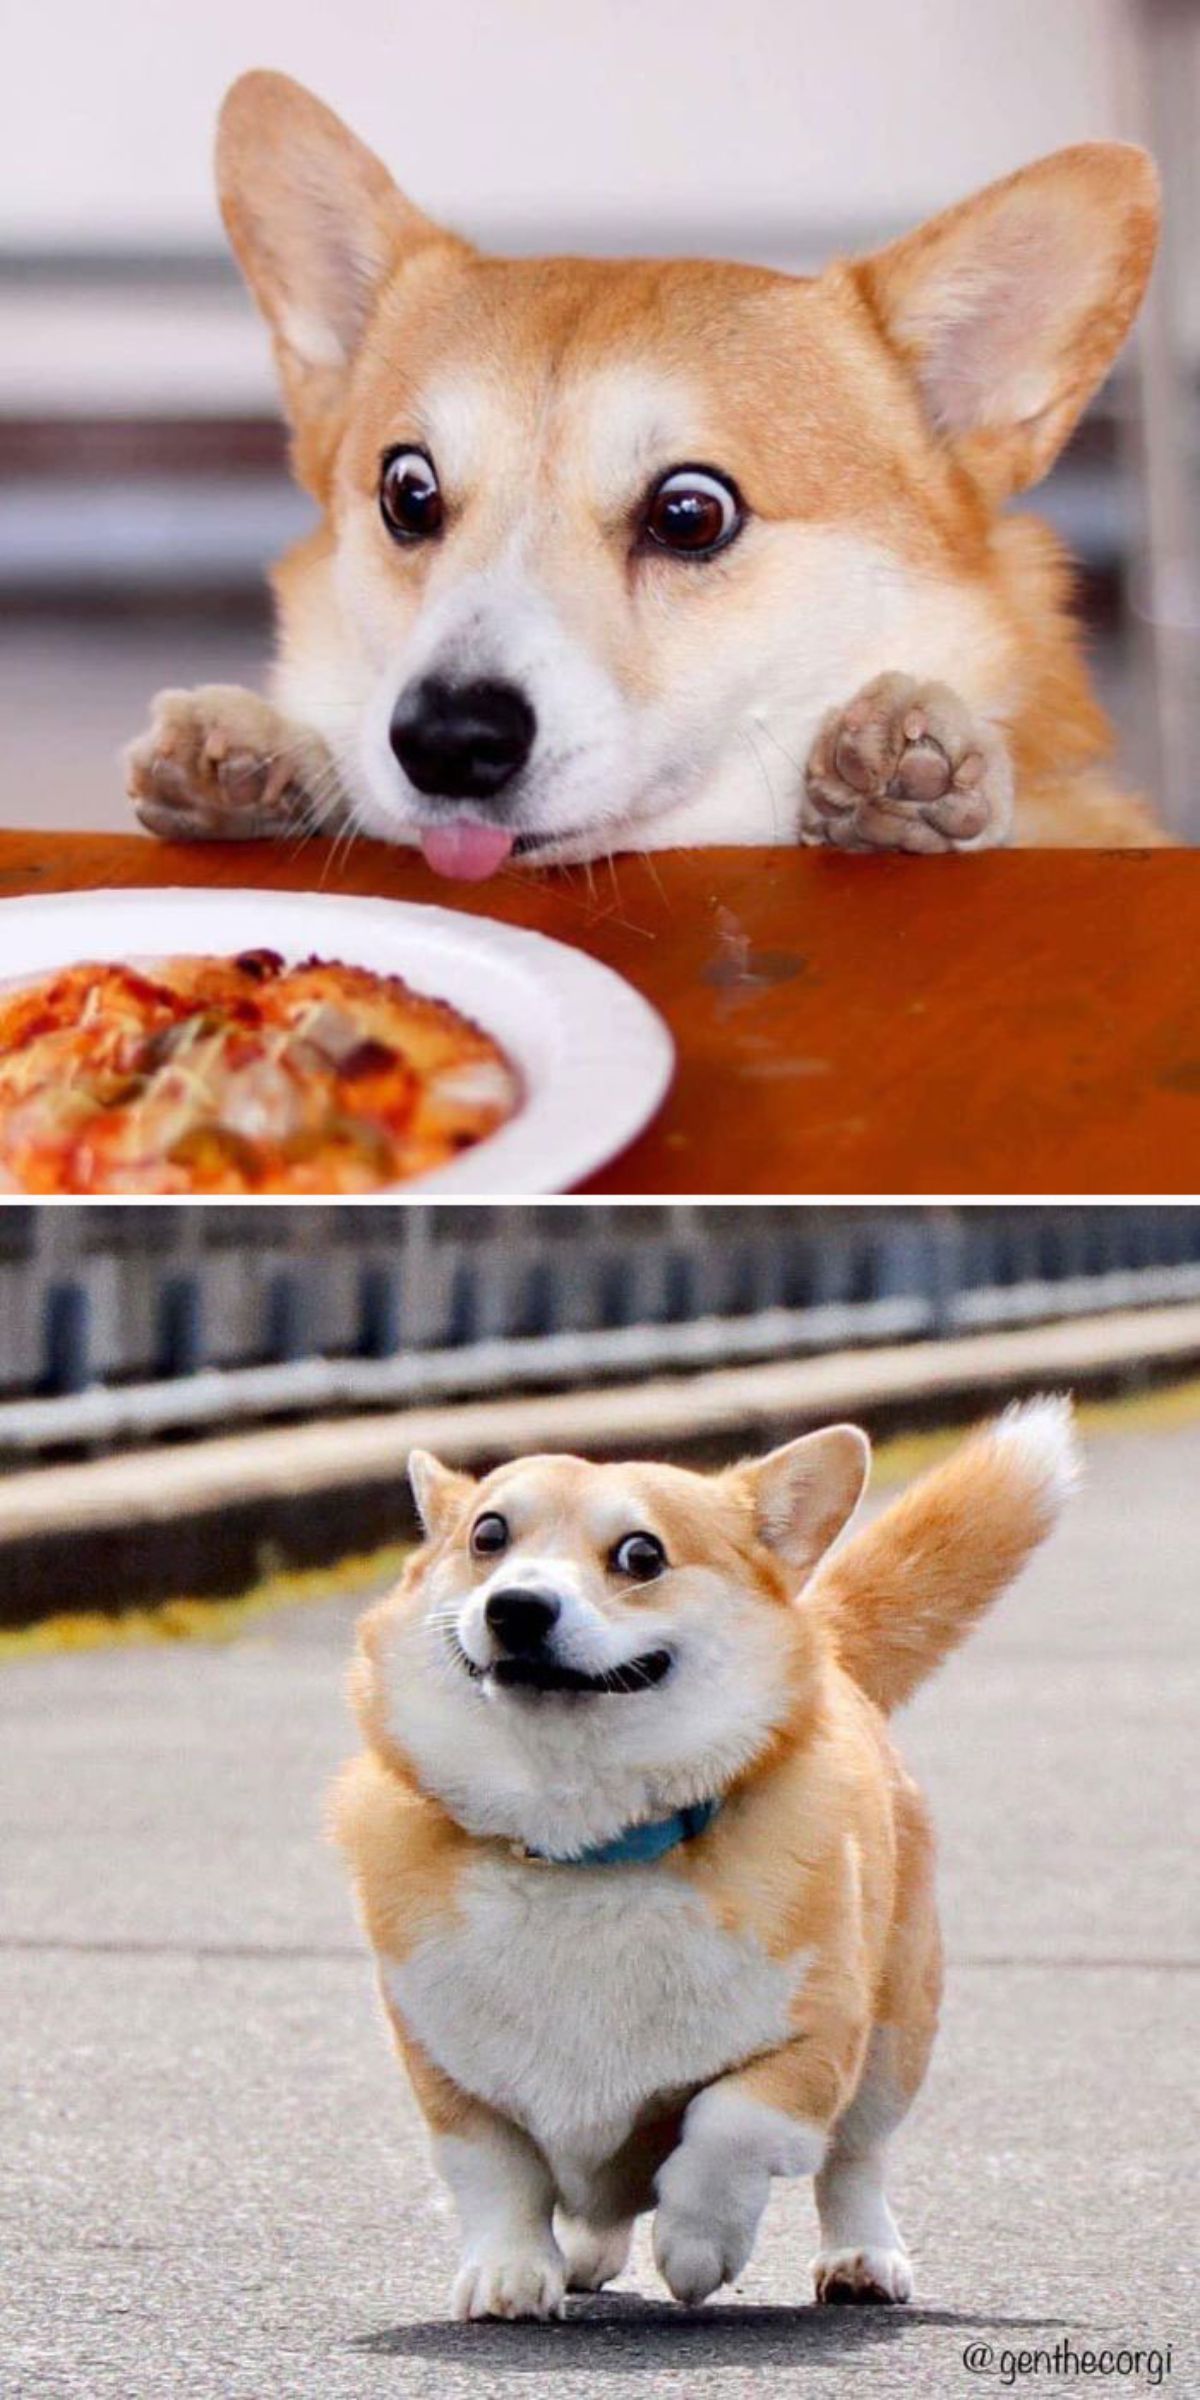 2 photos of brown and white corgi looking at a plate of food and looking to the left